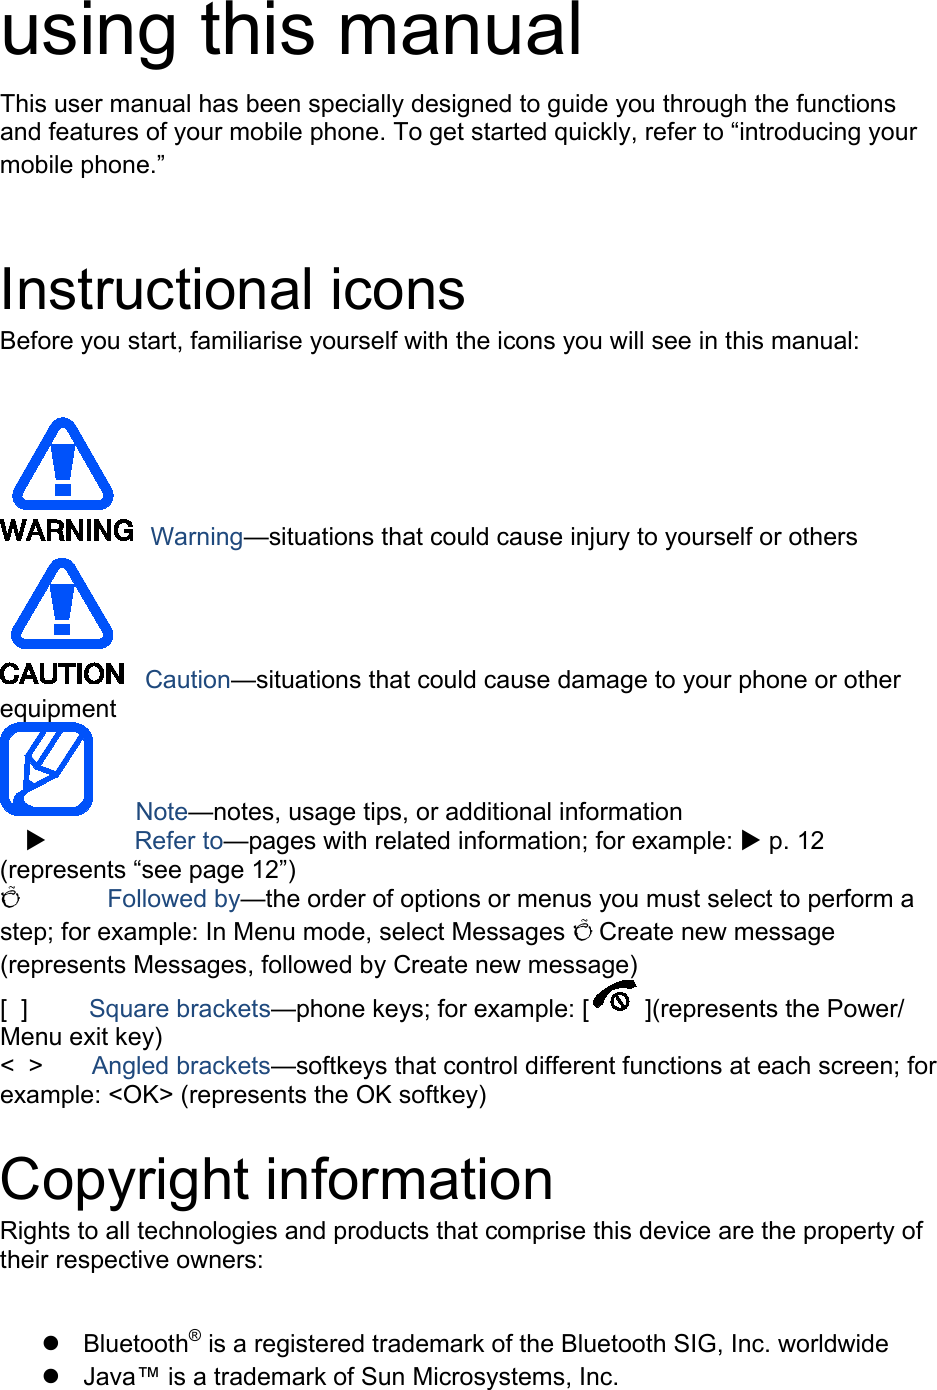 using this manual This user manual has been specially designed to guide you through the functions and features of your mobile phone. To get started quickly, refer to “introducing your mobile phone.”  Instructional icons Before you start, familiarise yourself with the icons you will see in this manual:     Warning—situations that could cause injury to yourself or others  Caution—situations that could cause damage to your phone or other equipment    Note—notes, usage tips, or additional information            Refer to—pages with related information; for example:  p. 12 (represents “see page 12”) Õ        Followed by—the order of options or menus you must select to perform a step; for example: In Menu mode, select Messages Õ Create new message (represents Messages, followed by Create new message) [  ]      Square brackets—phone keys; for example: [ ](represents the Power/ Menu exit key) &lt;  &gt;    Angled brackets—softkeys that control different functions at each screen; for example: &lt;OK&gt; (represents the OK softkey)  Copyright information Rights to all technologies and products that comprise this device are the property of their respective owners:   Bluetooth® is a registered trademark of the Bluetooth SIG, Inc. worldwide  Java™ is a trademark of Sun Microsystems, Inc. 